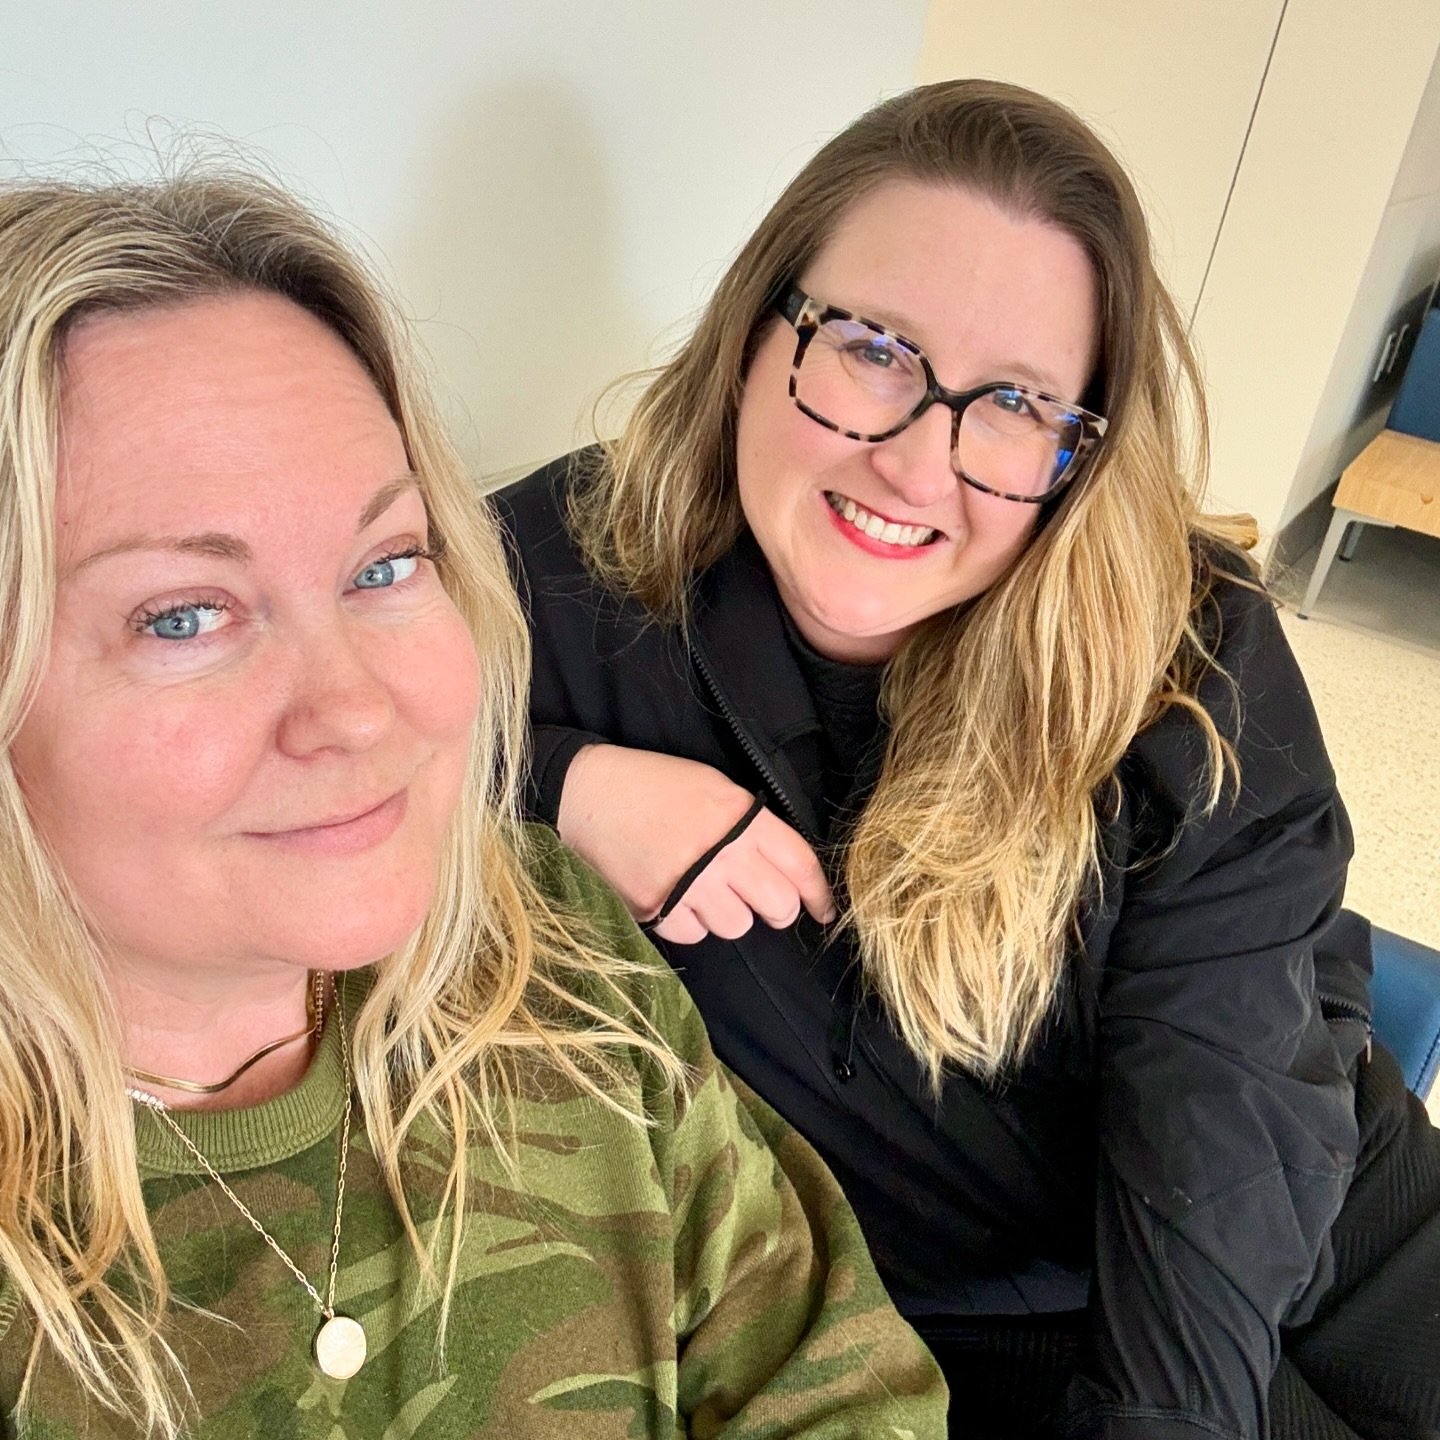 This is what 35 years of friendship looks like: 13 hours in a hospital waiting room, taking a day off work of your important job saving lives to sit with my family while we stare into space, answering every single medical question we&rsquo;ve ever ha